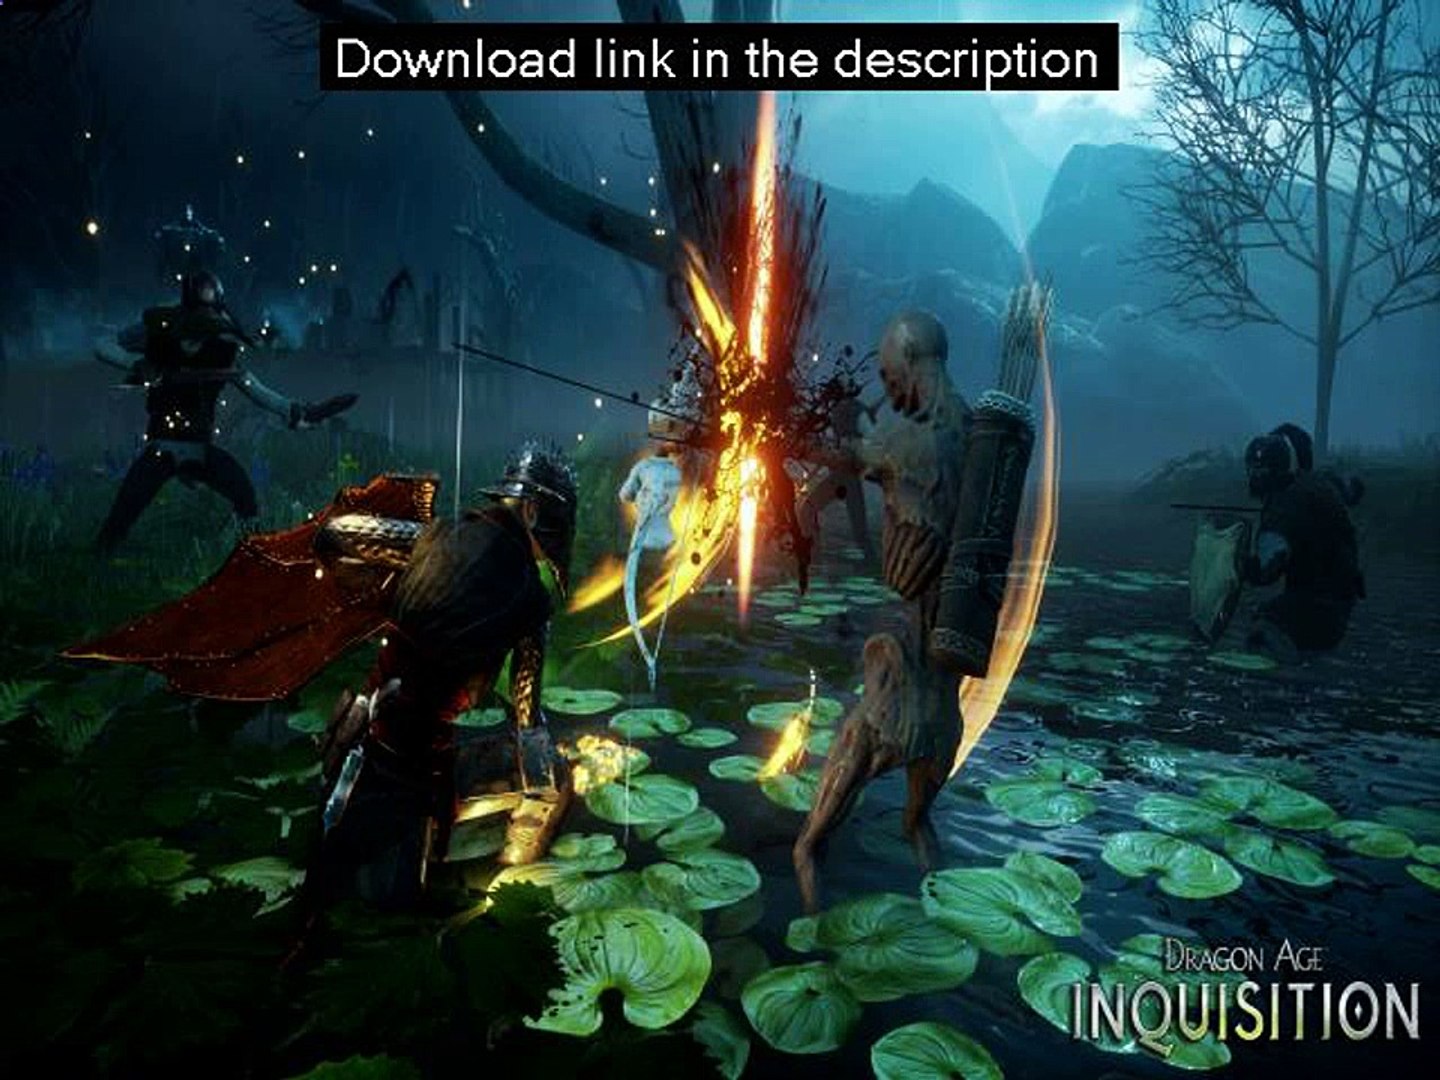 dragon age inquisition pc gamepad not working - video dailymotion